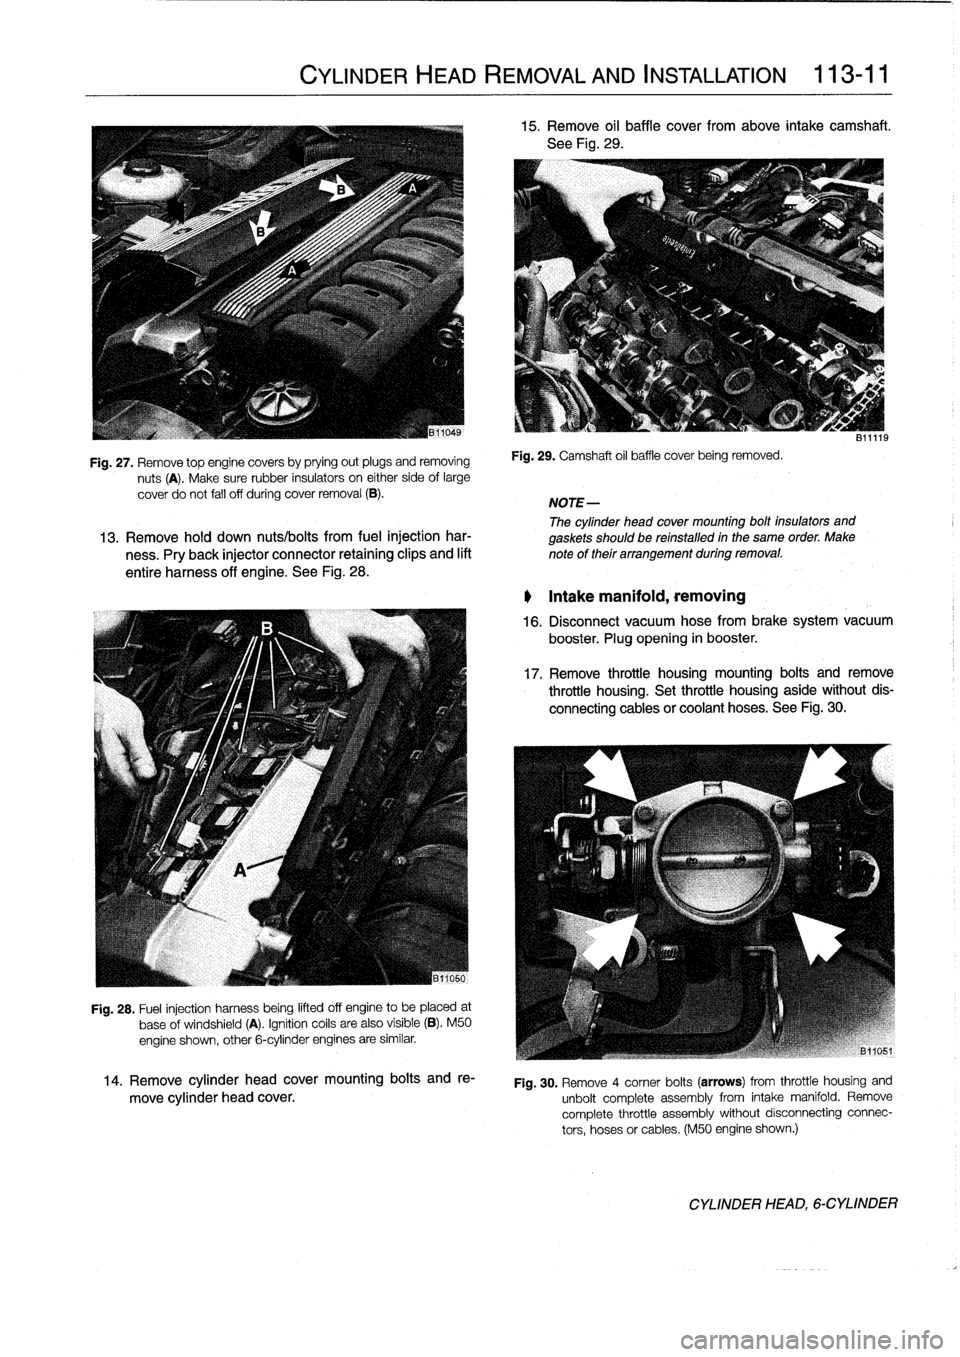 BMW 318i 1997 E36 Owners Manual 
Fig
.
27
.
Remove
top
enginecovers
by
prying
out
plugs
and
removing

nuts
(A)
.
Make
sure
rubber
insulators
on
either
side
of
large

cover
do
not
fall
off
during
cover
removal
(B)
.

Fig
.
28
.
Fuel
